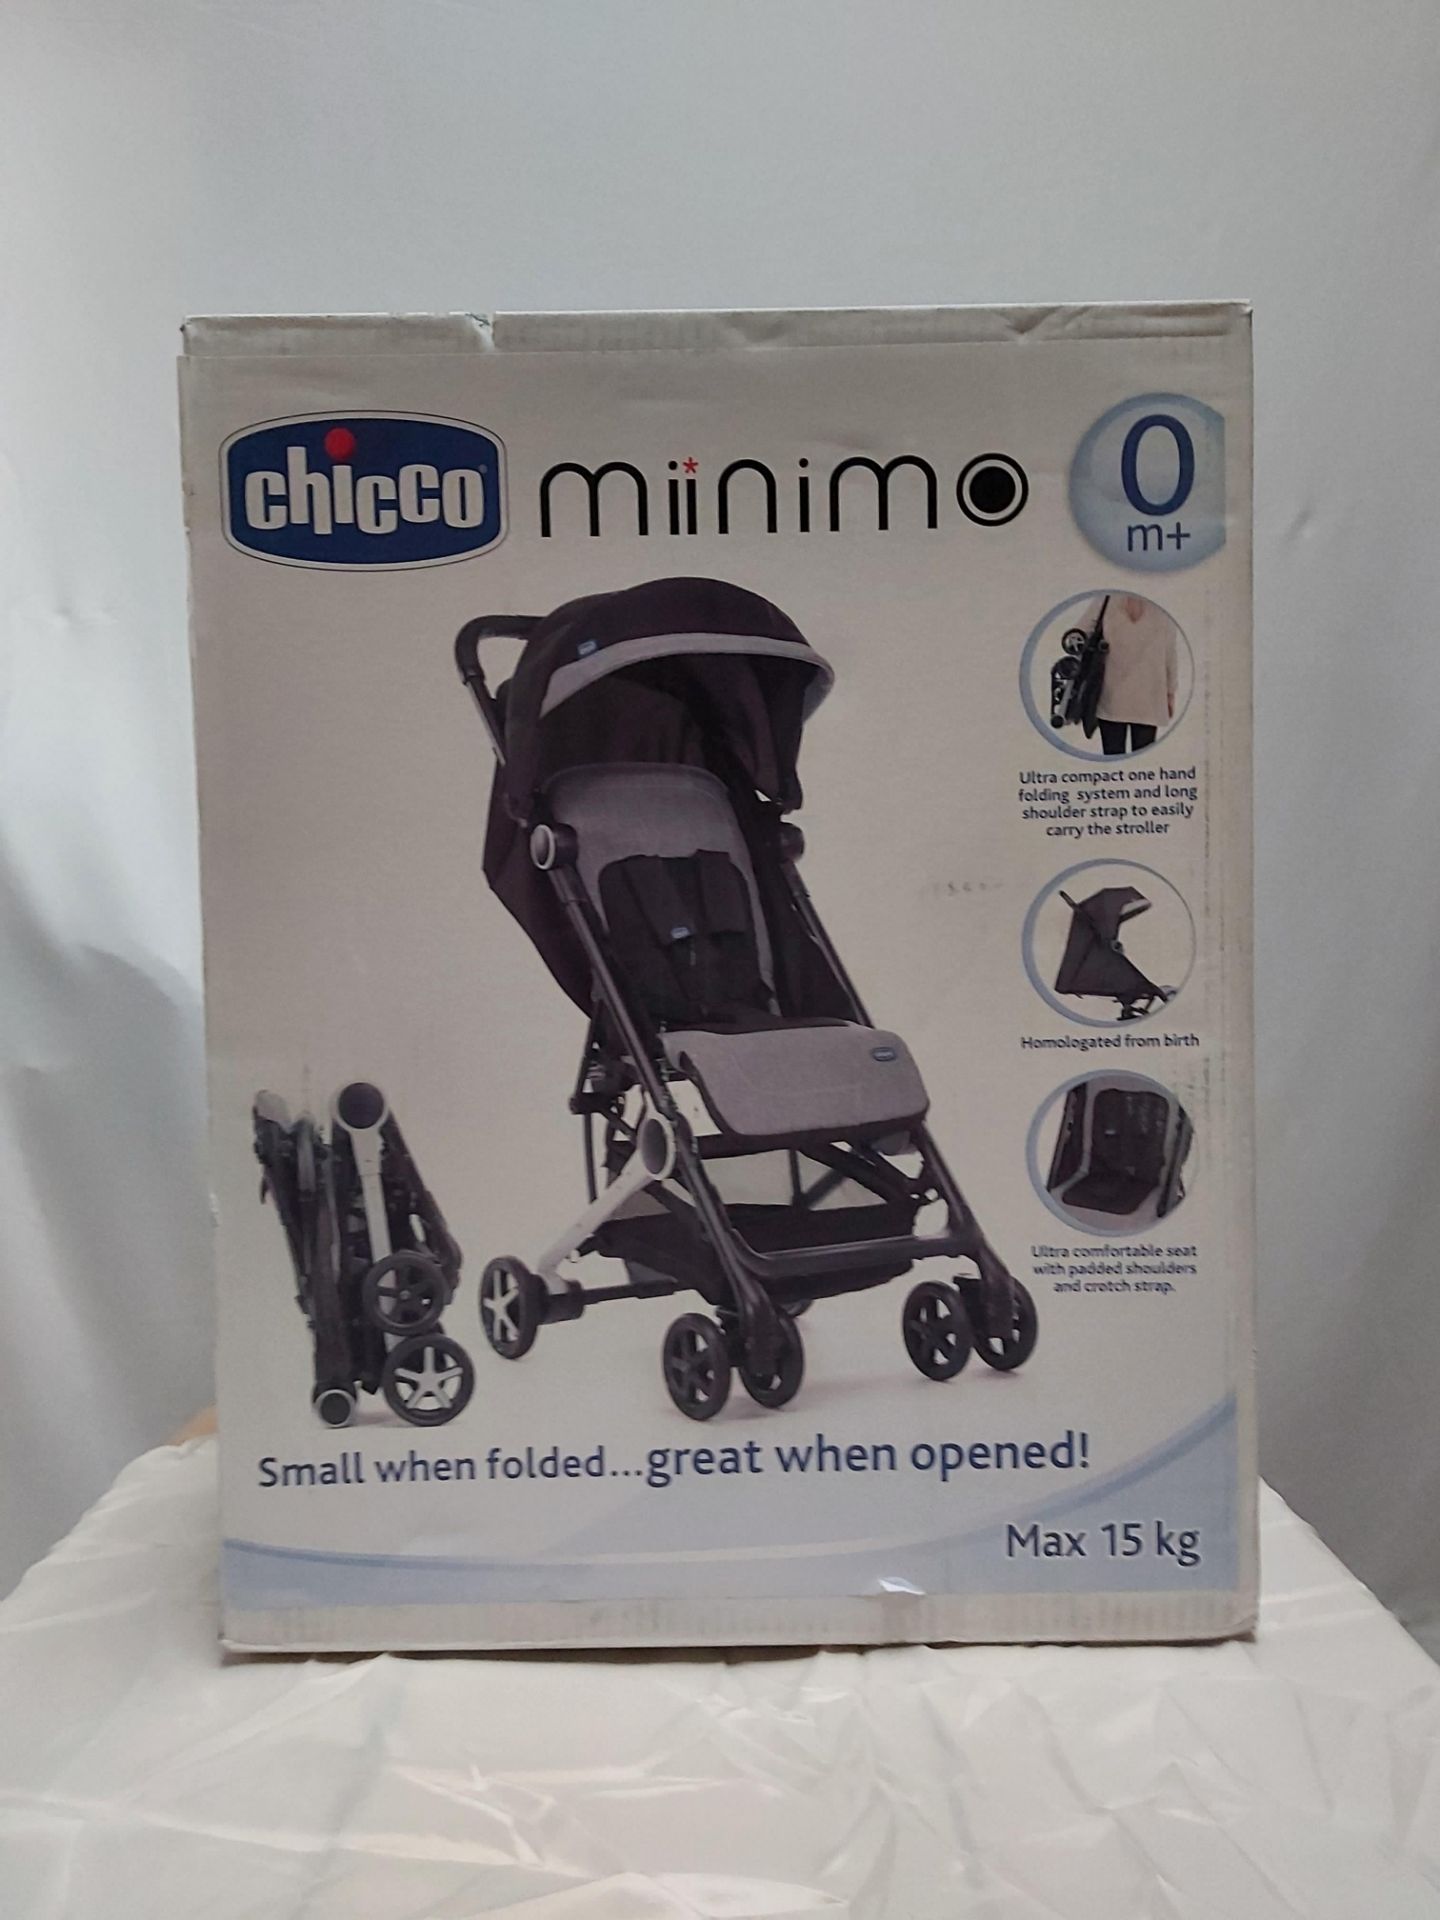 5 x Chicco Miinimo Silver/Grey Folding Stroller. Condition New & Sealed. (RRP £550)